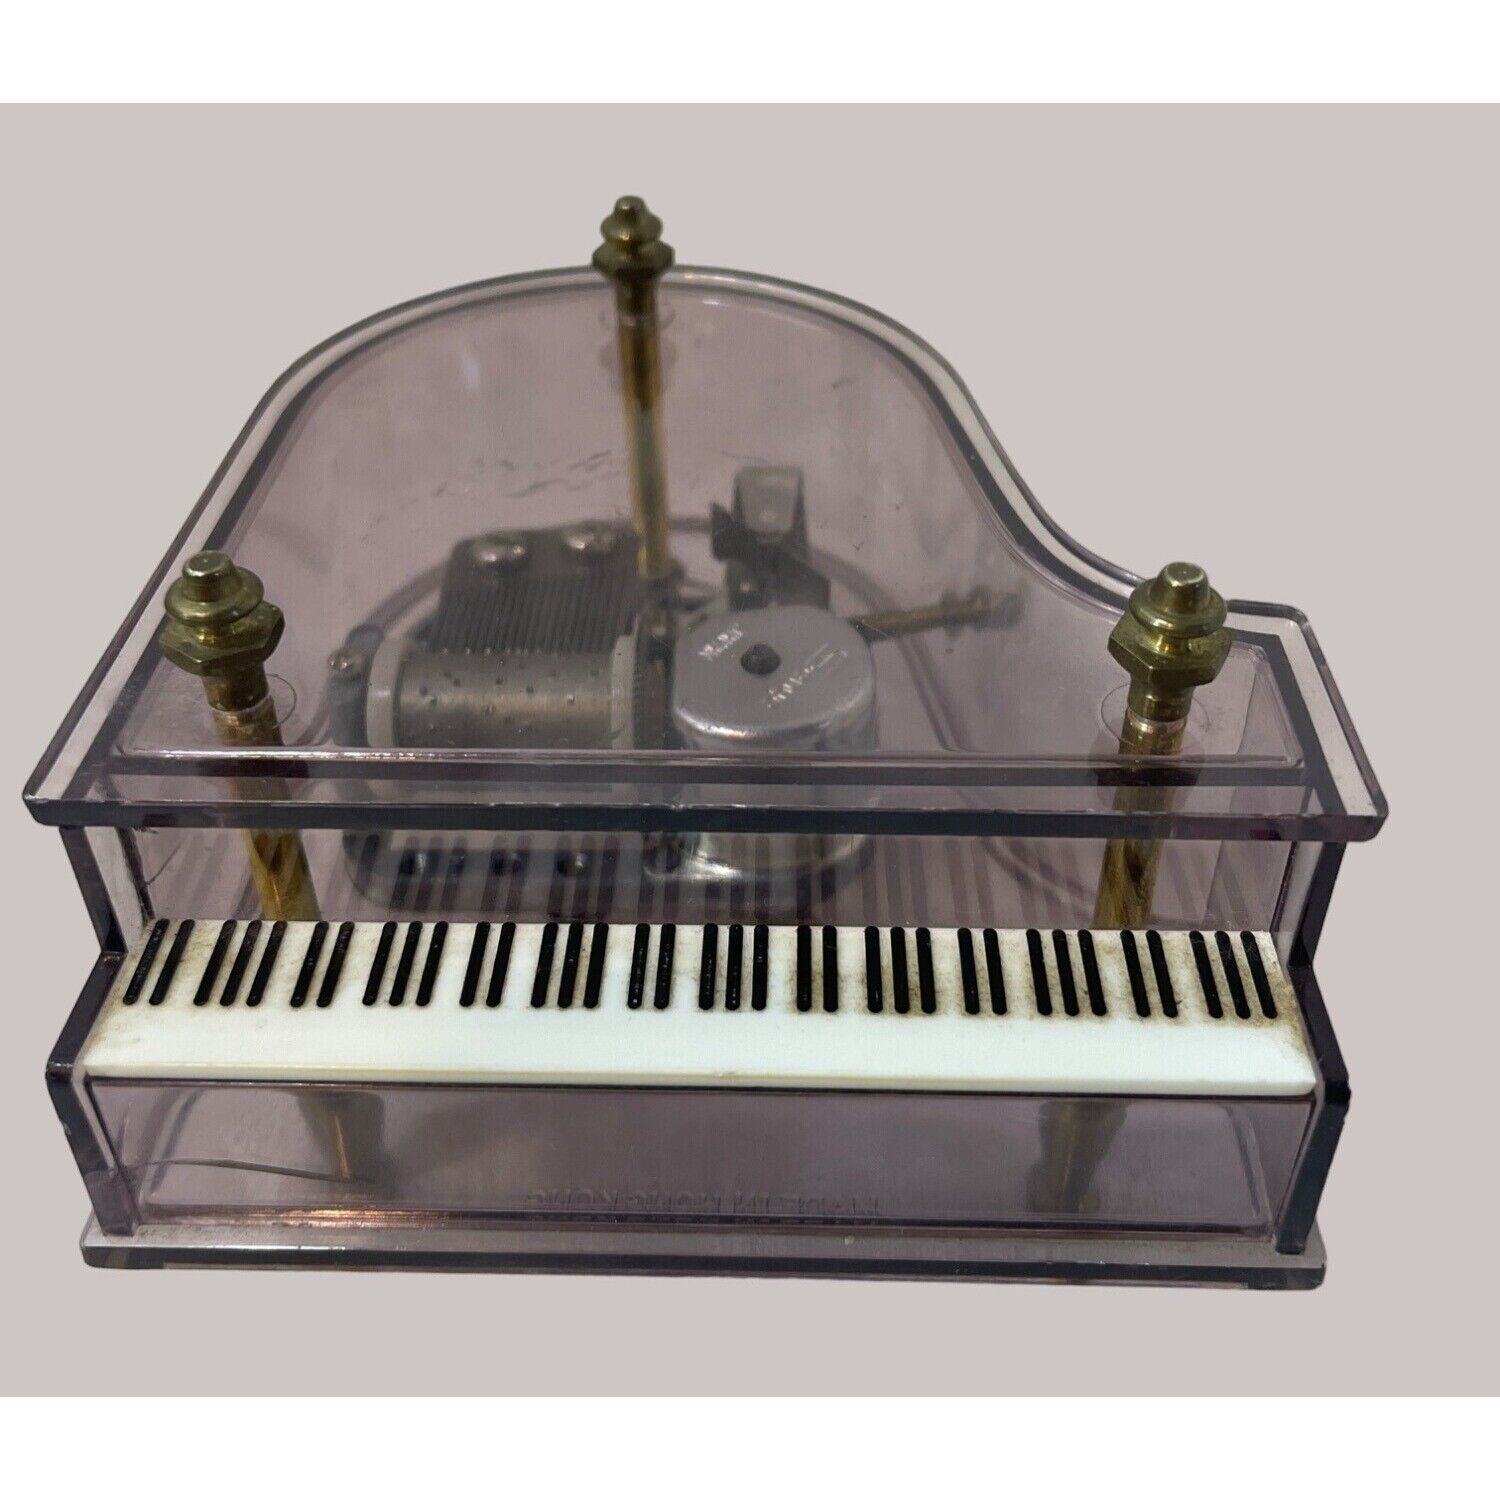 Vintage Piano Shaped Music Box With Gold Accents & White Keys Brass Legs